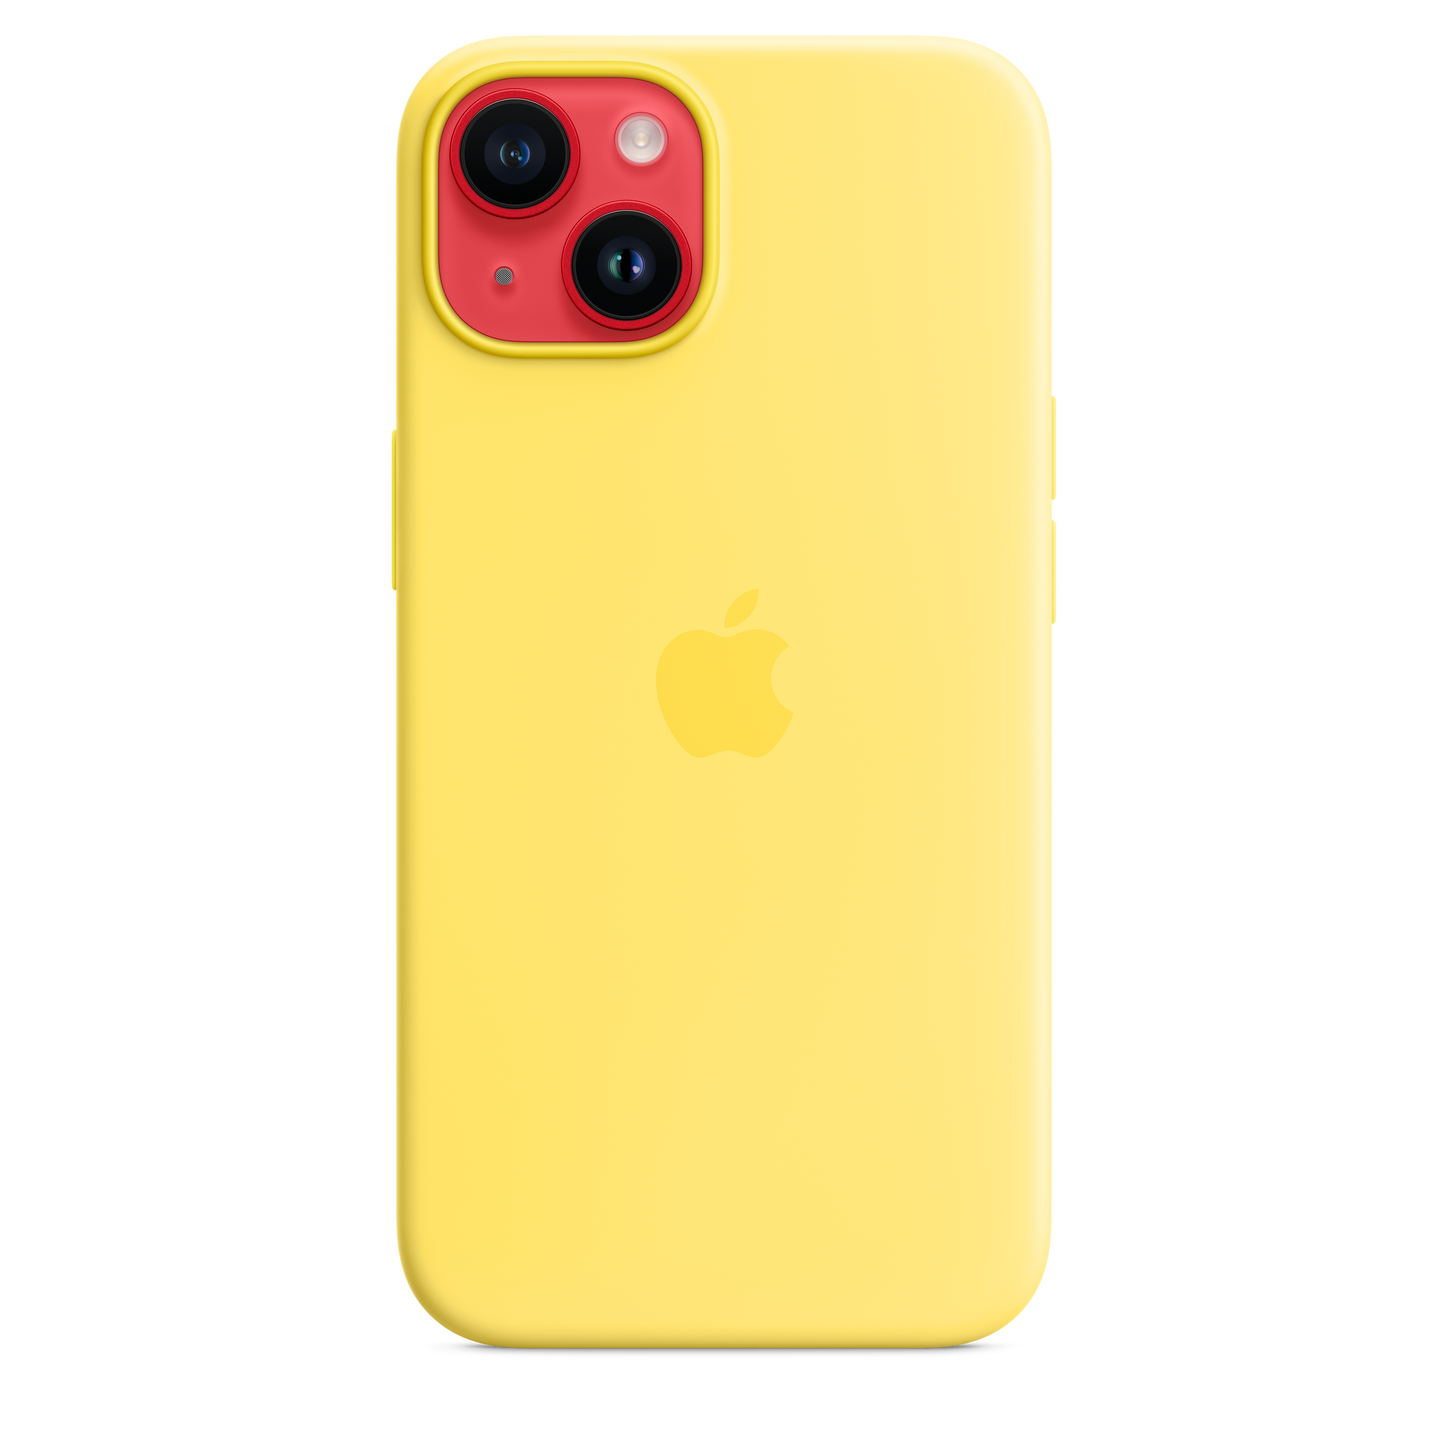 iPhone 14 Silicone Case with MagSafe - Canary Yellow